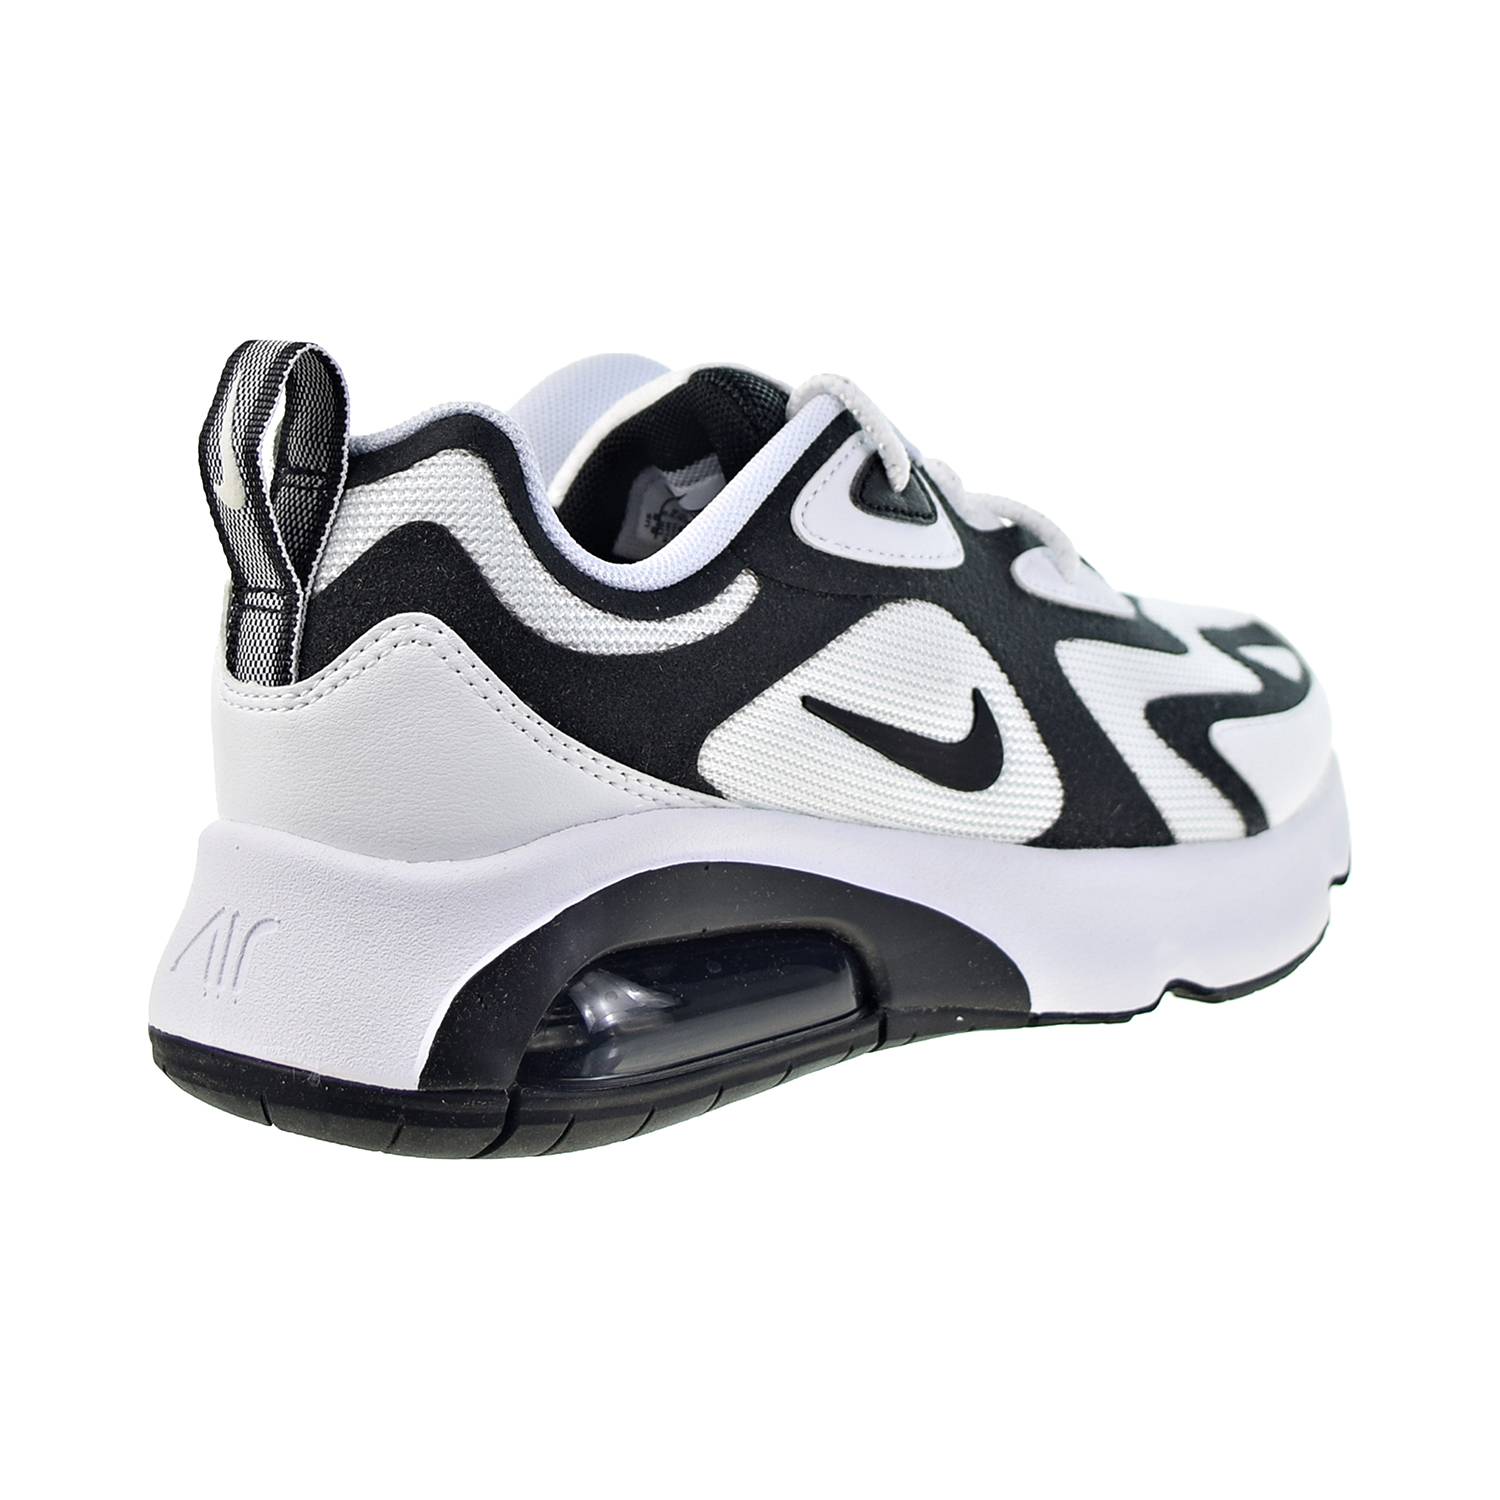 Nike Air Max 200 Womens Shoes Size 6, Color: White/Black/Anthracite - image 3 of 6